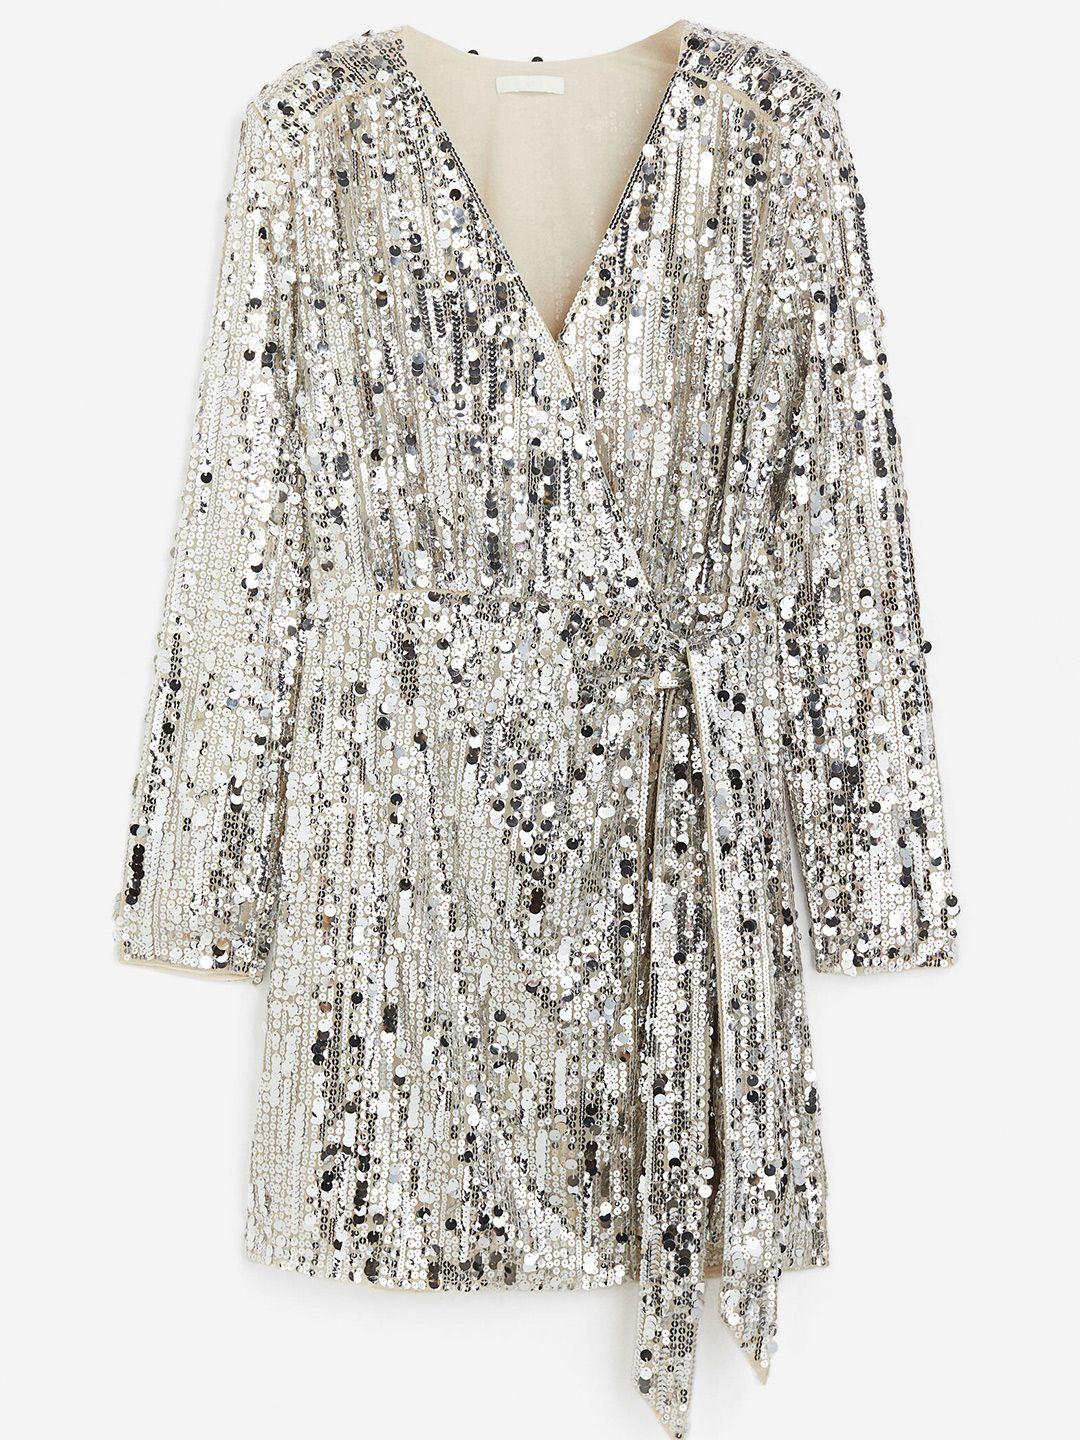 h&m sequined wrap dress